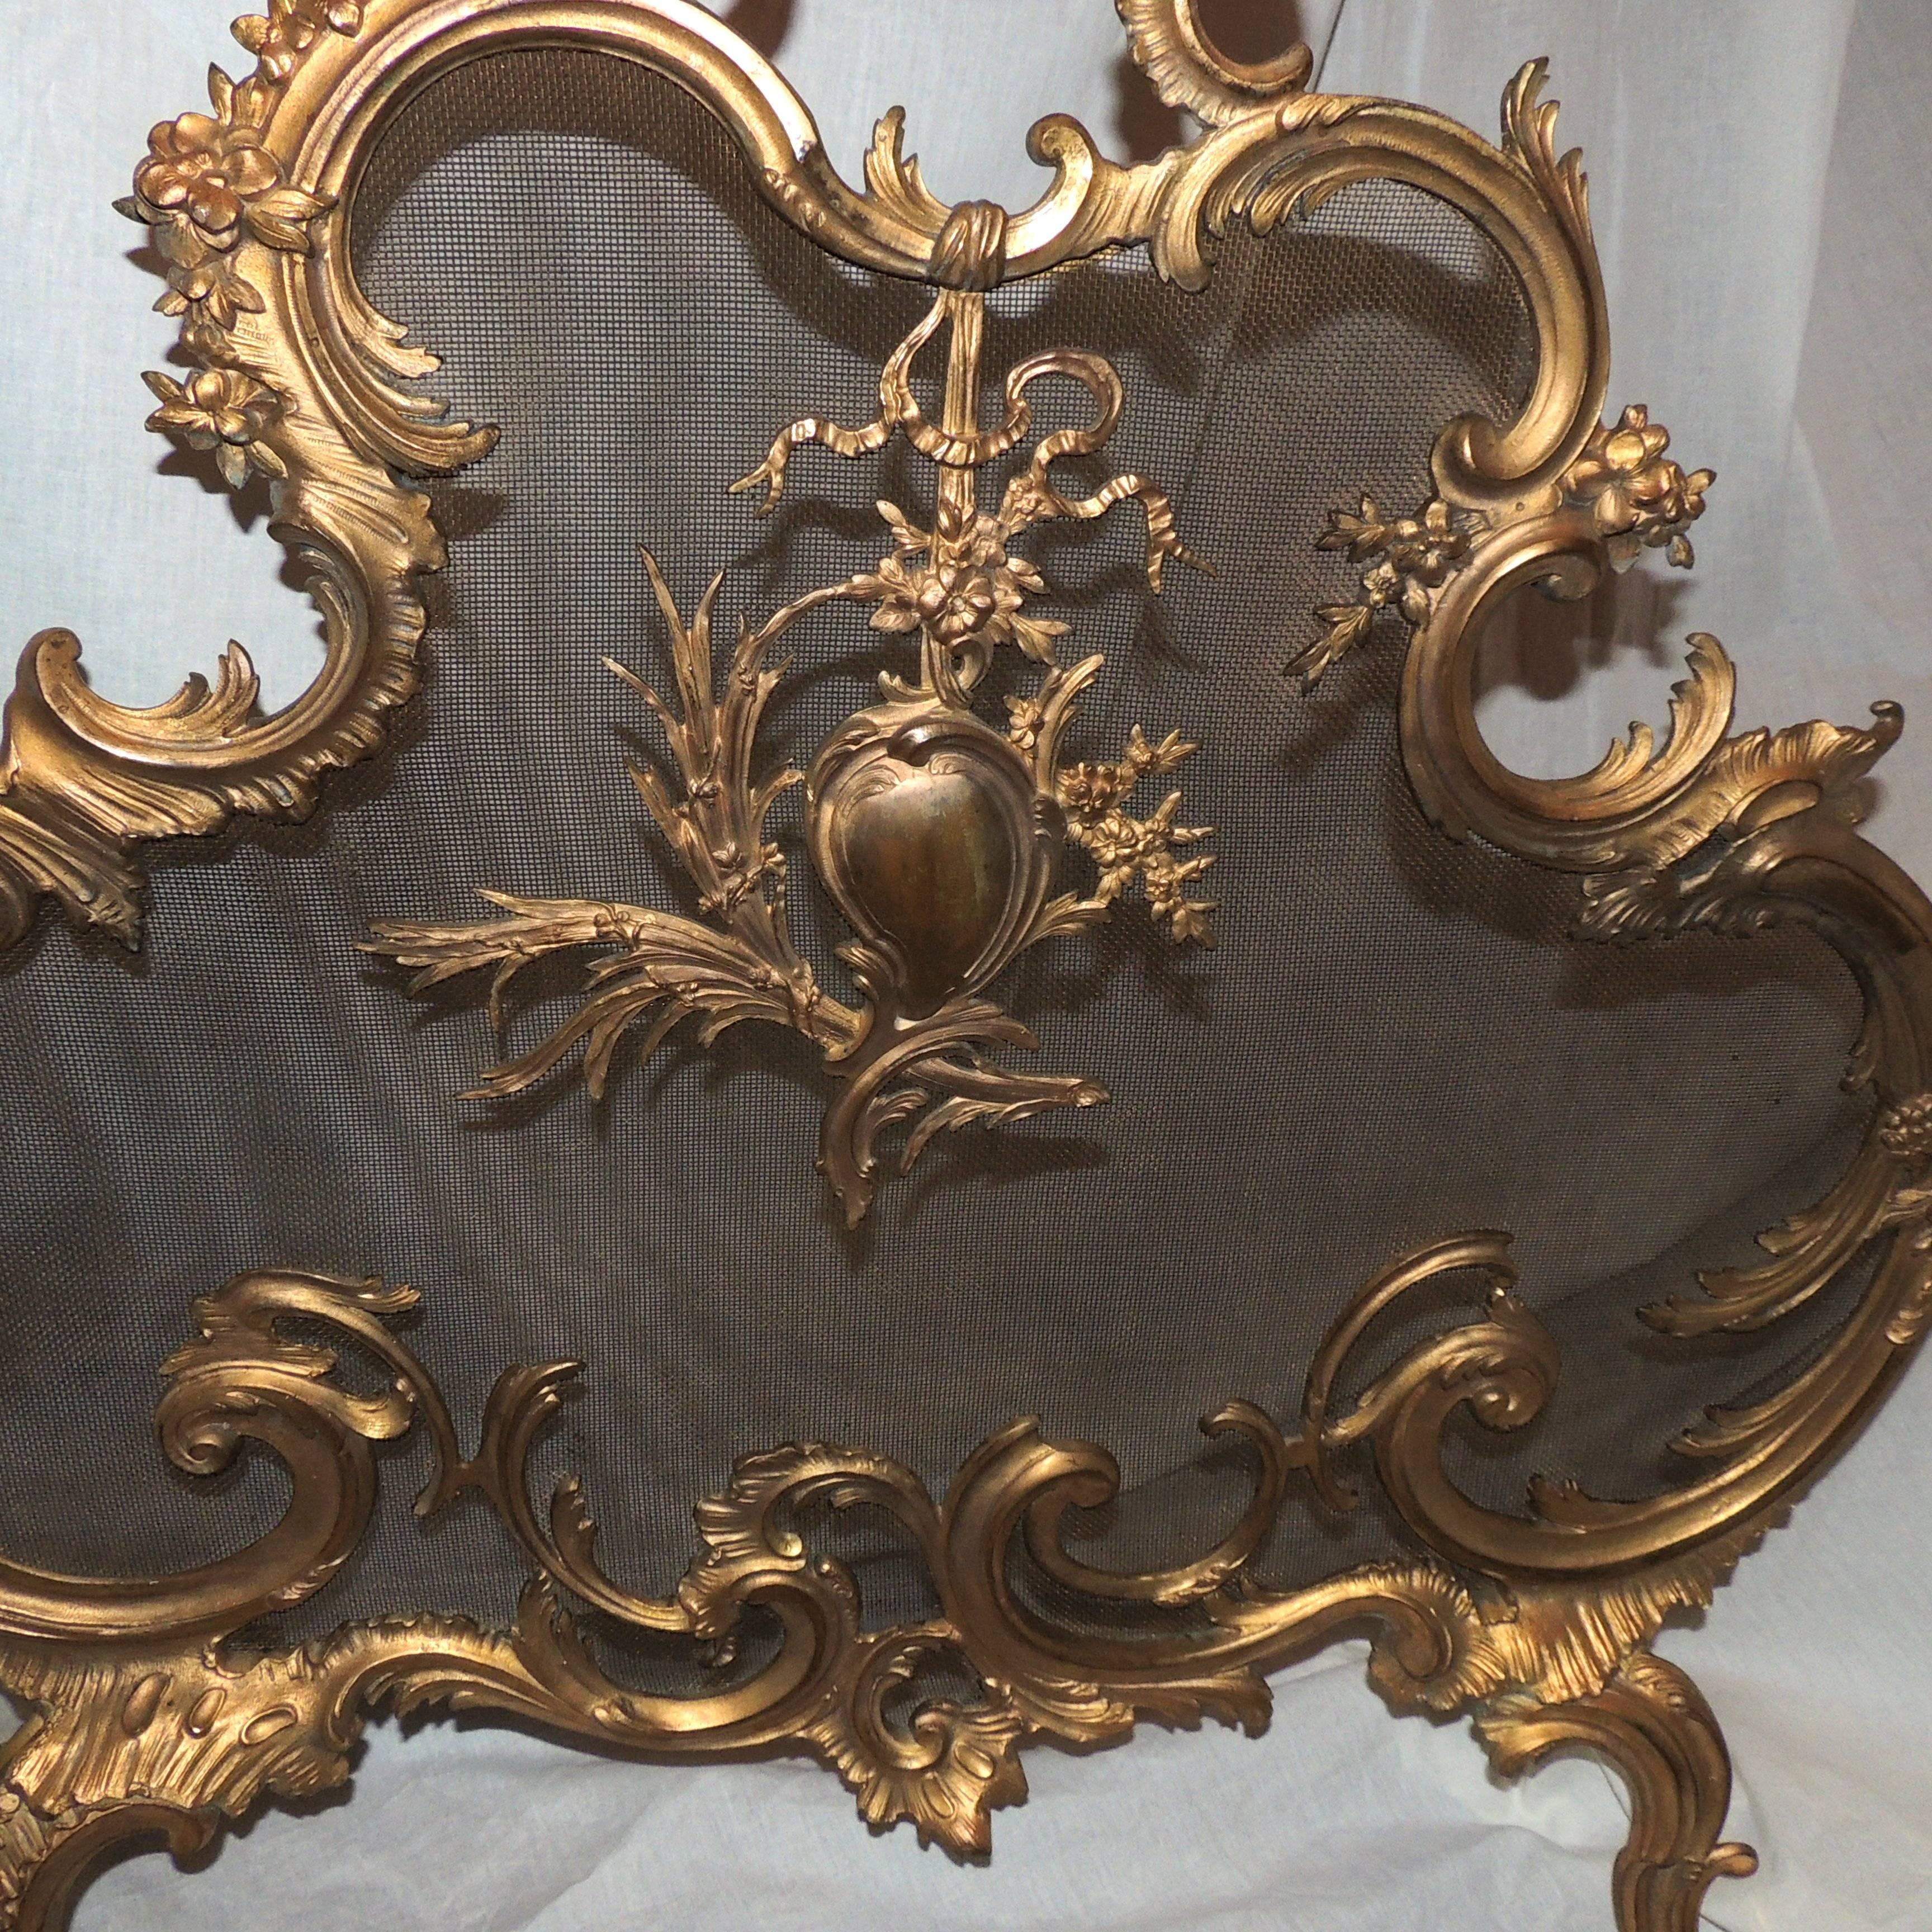 Early 20th Century Wonderful Large French Rococo Gilt Bronze Filigree Fire Place Screen Firescreen